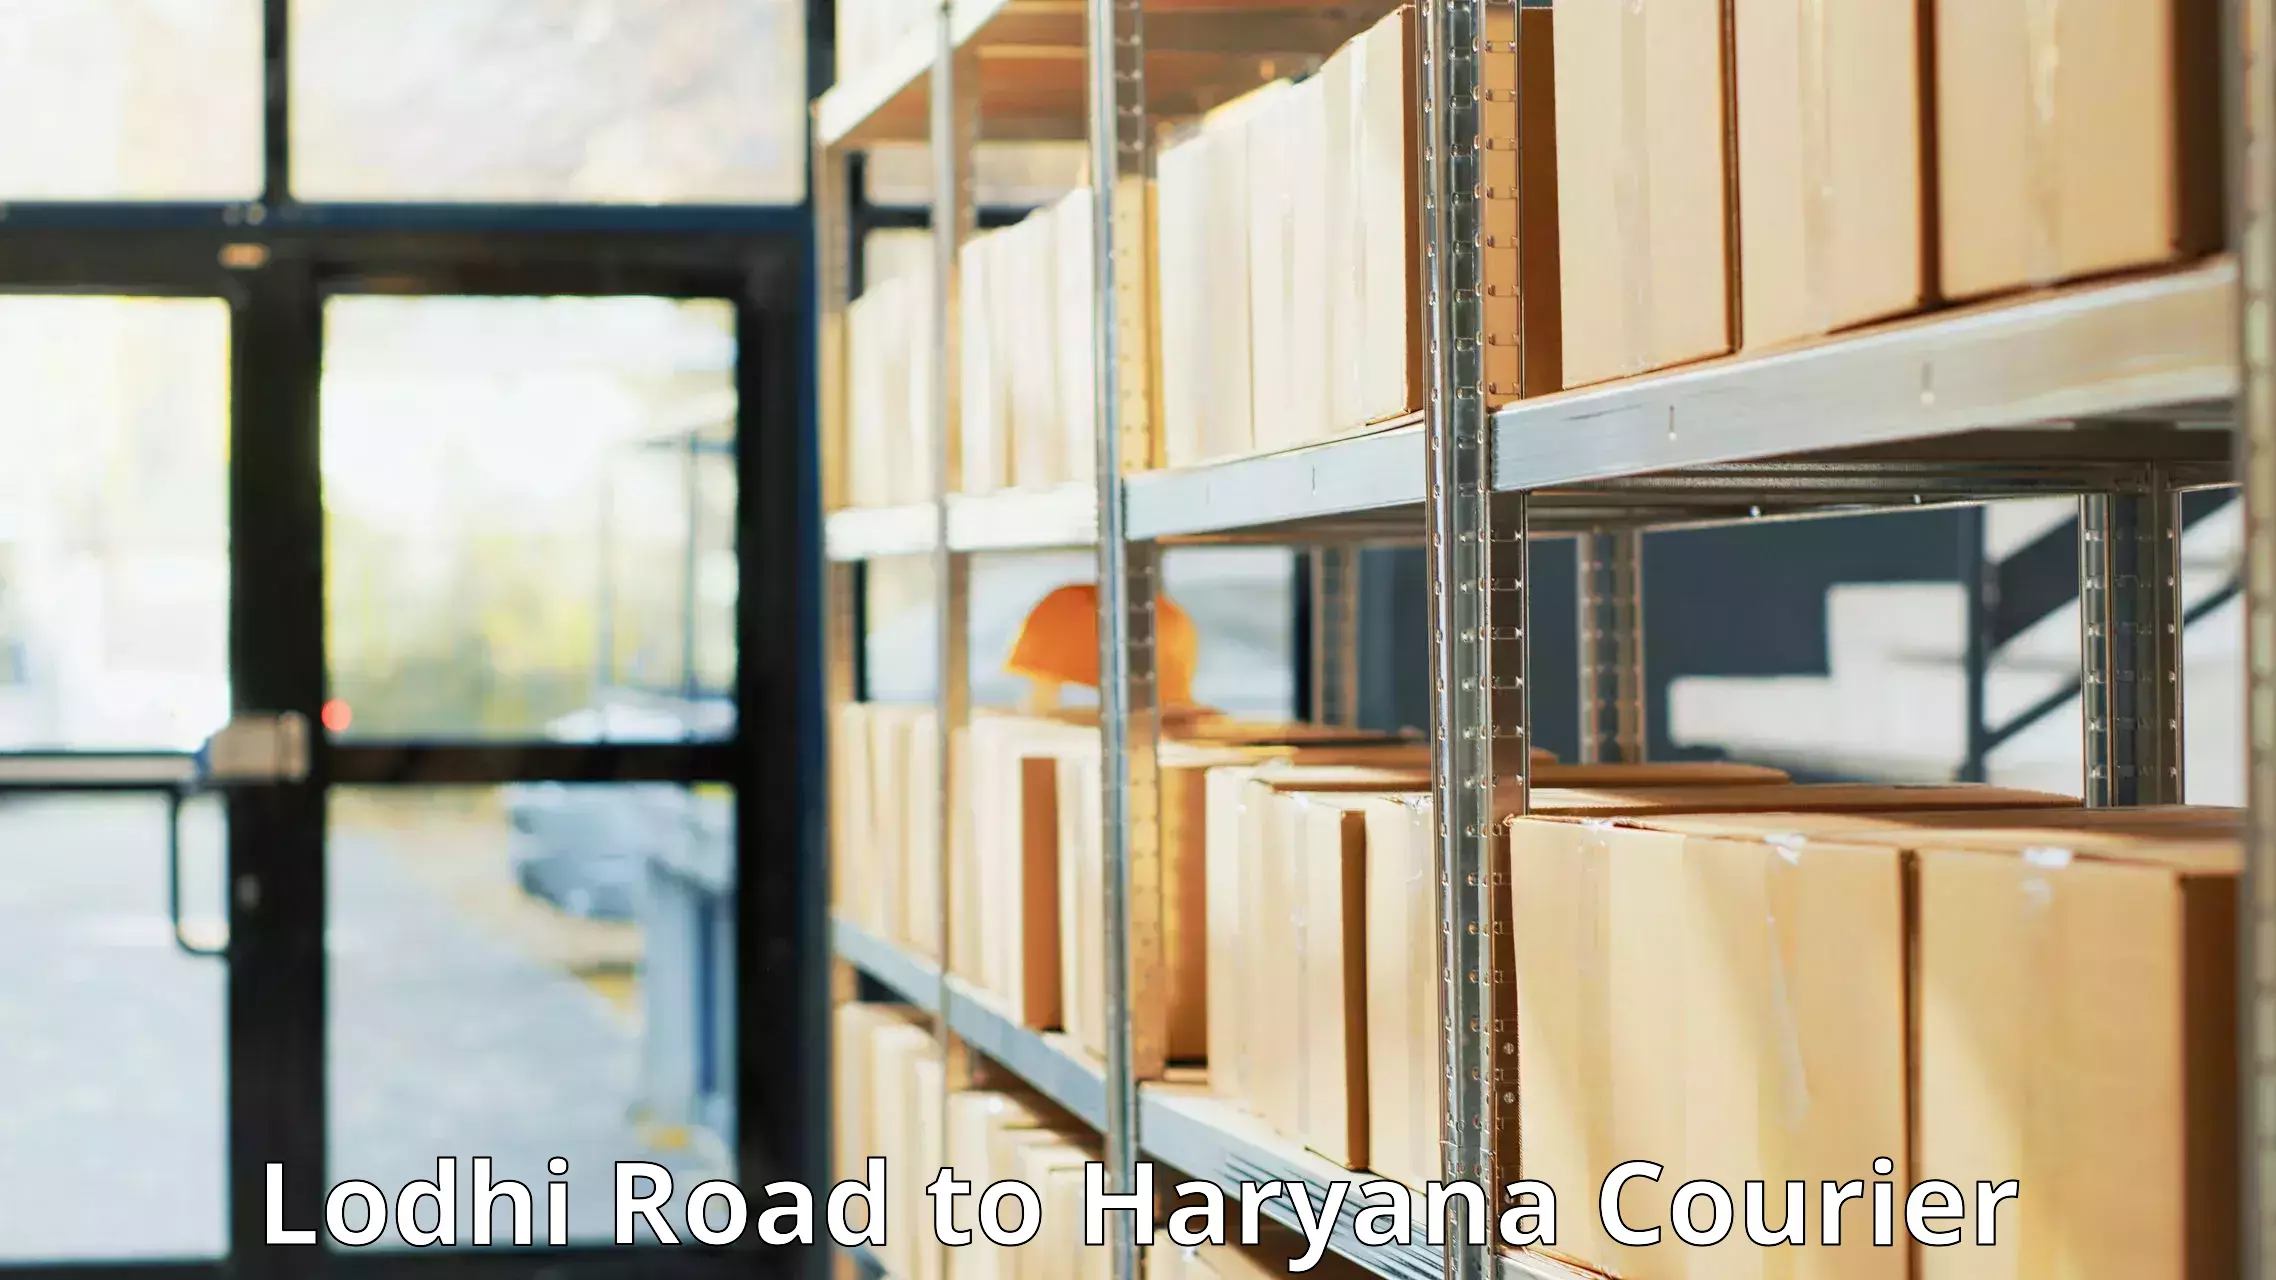 High-priority parcel service Lodhi Road to Haryana